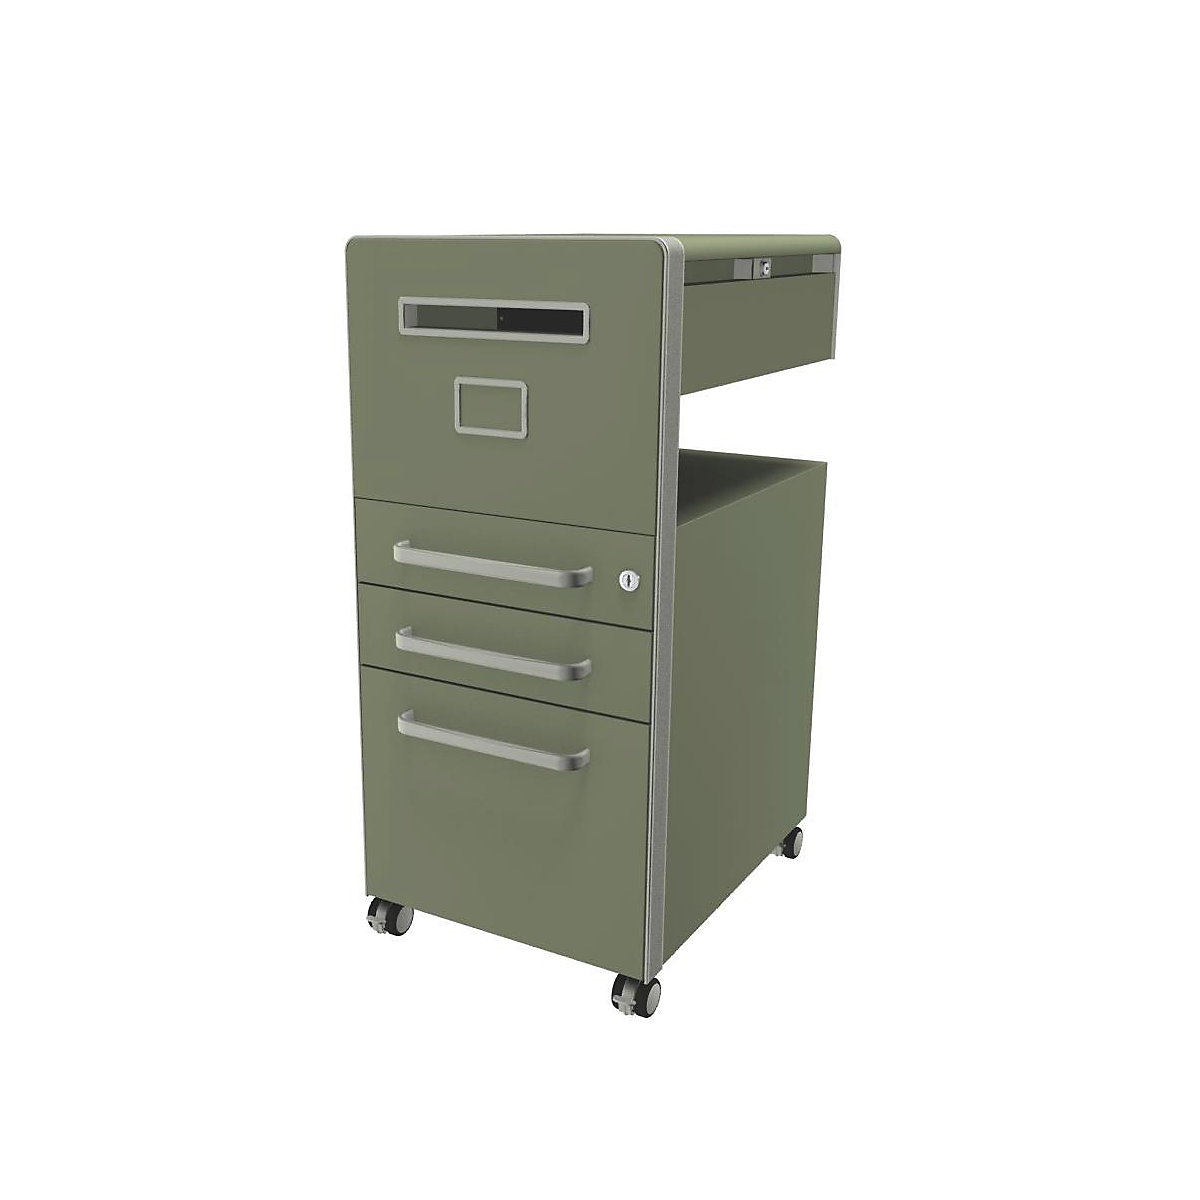 Bite™ pedestal furniture, with 1 whiteboard, opens on the left side – BISLEY, with 2 universal drawers, 1 suspension file drawer, regent-9